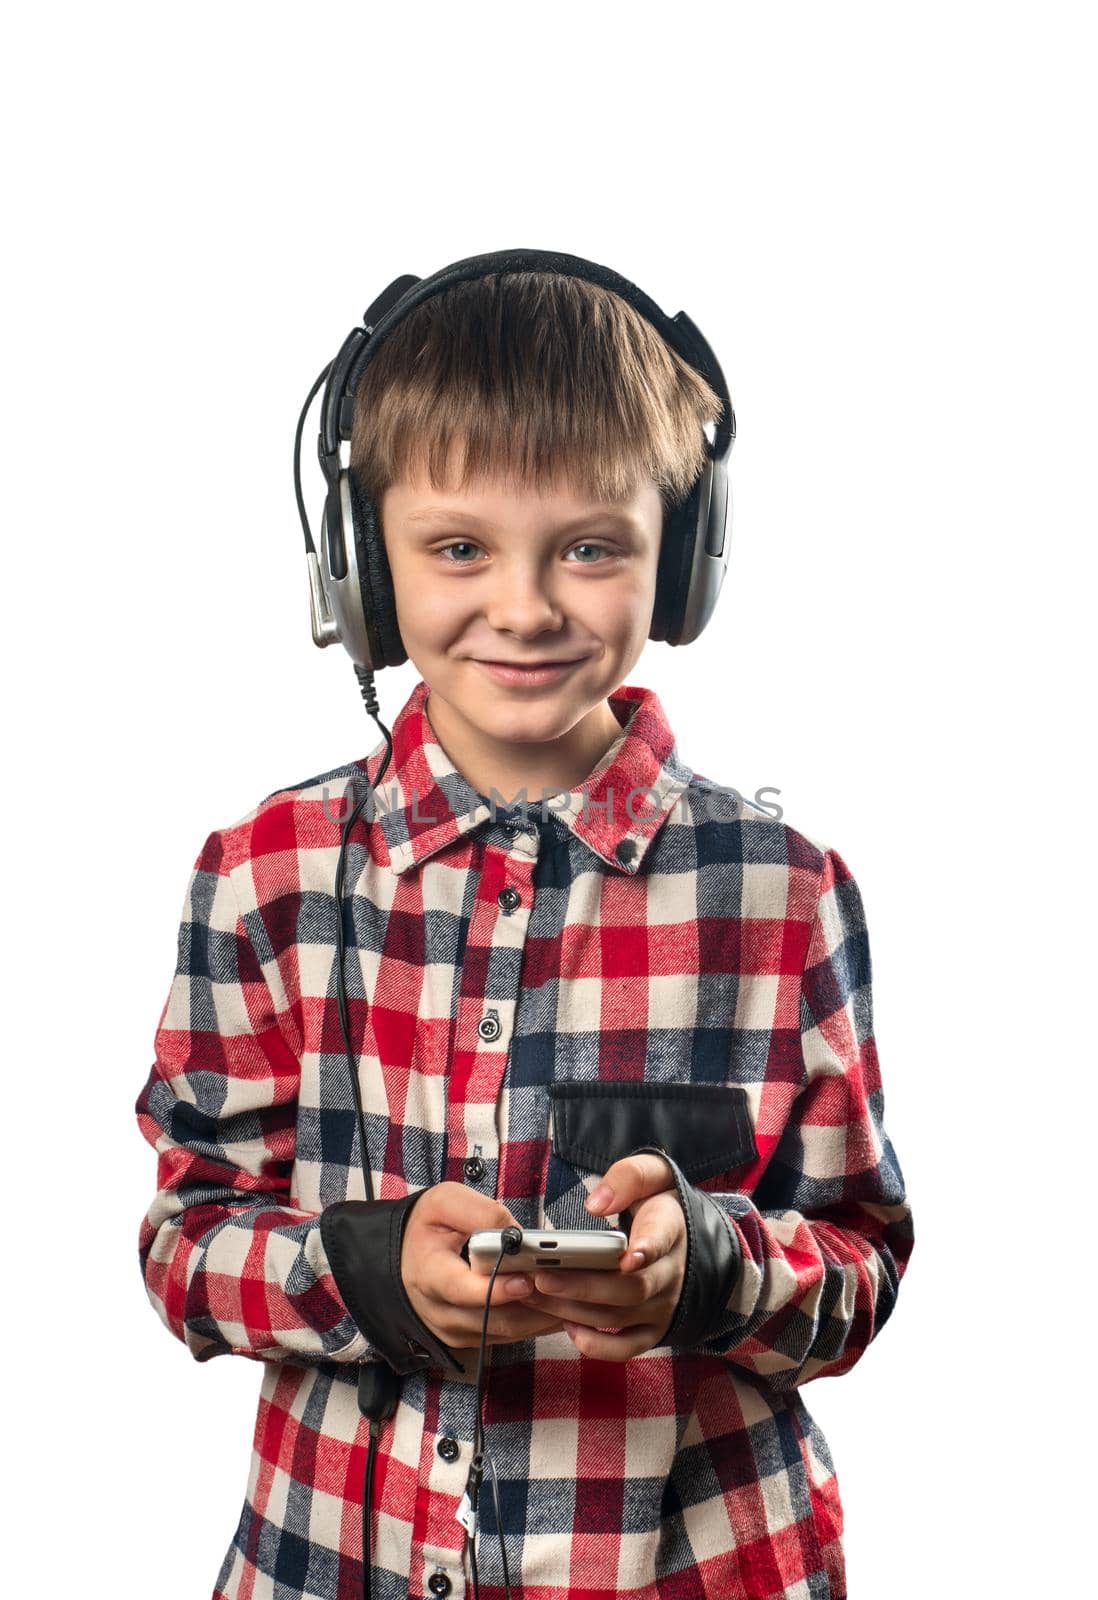 Boy listening to music on headphones with a smartphone on a white background